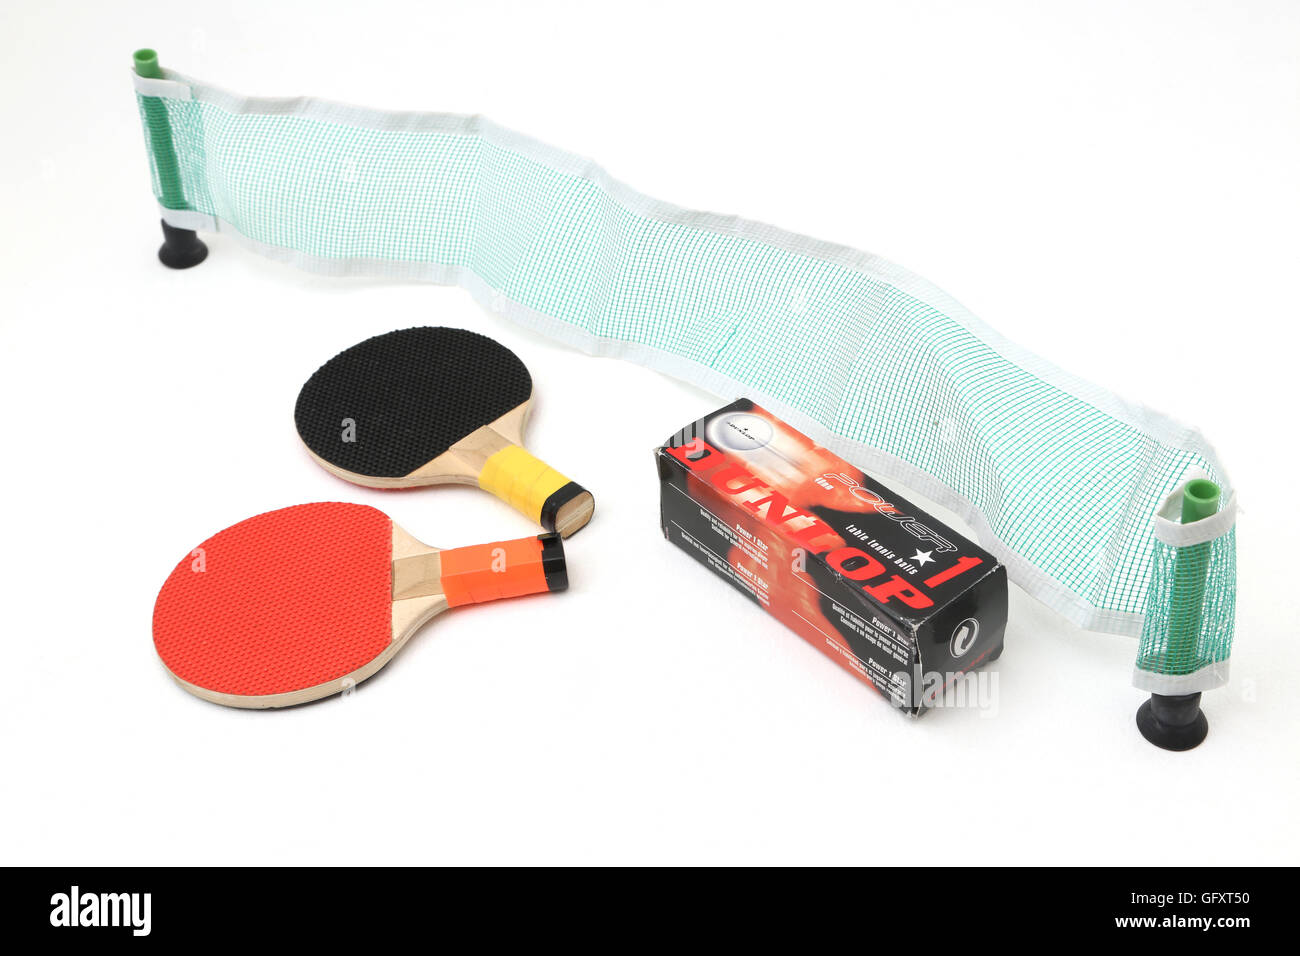 Travel Table Tennis With Paddles, Net And Dunlop Ping Pong Balls Stock Photo